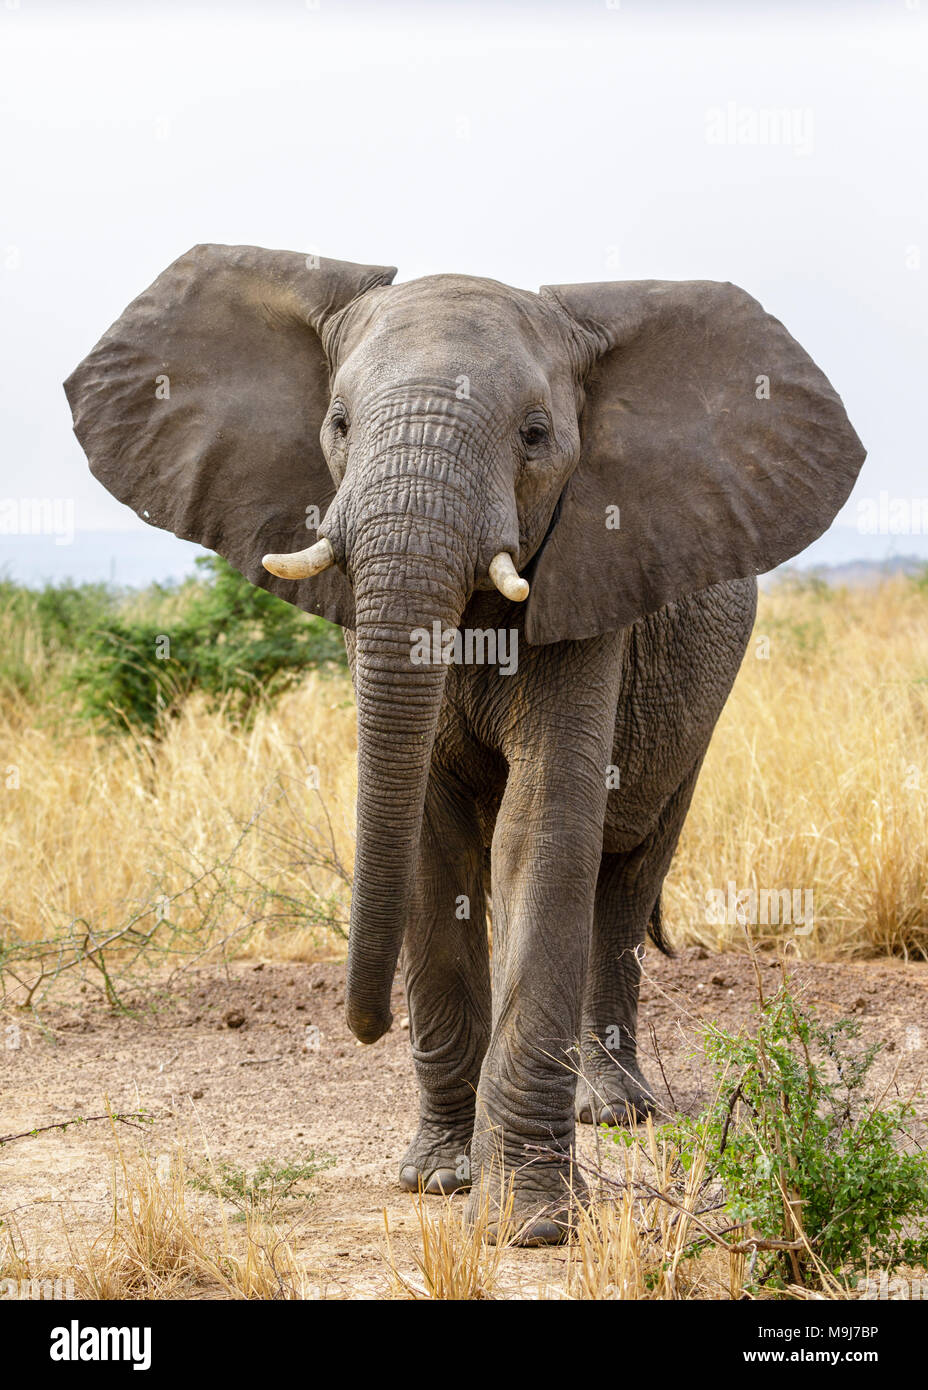 Full front view of a large elephant looking directly at the viewer Stock Photo